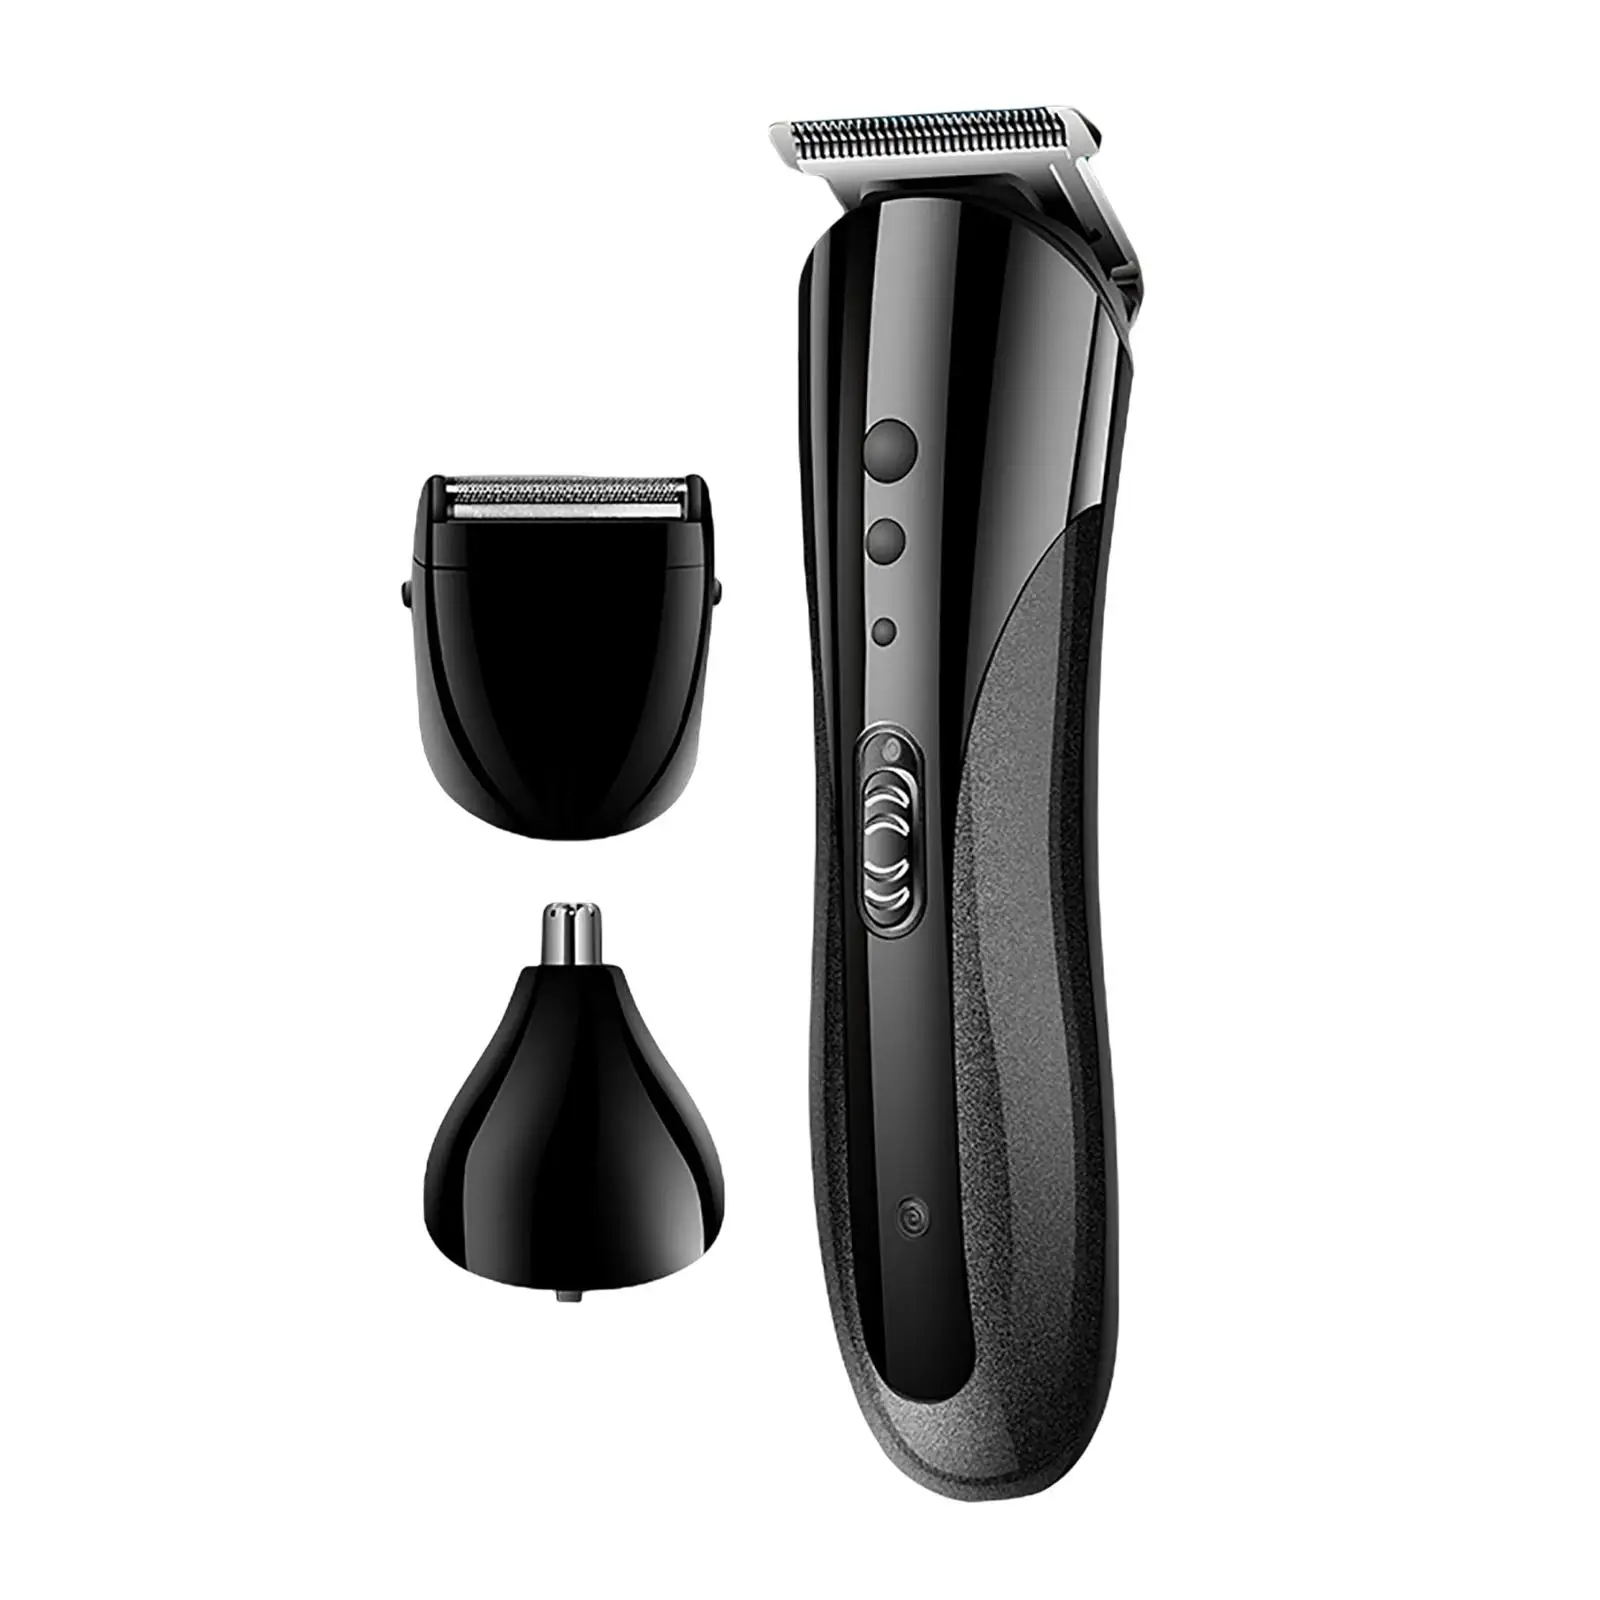 

Hair Clippers Cordless Trimmer USB Charging Plug Type UK Blade Washable for Men